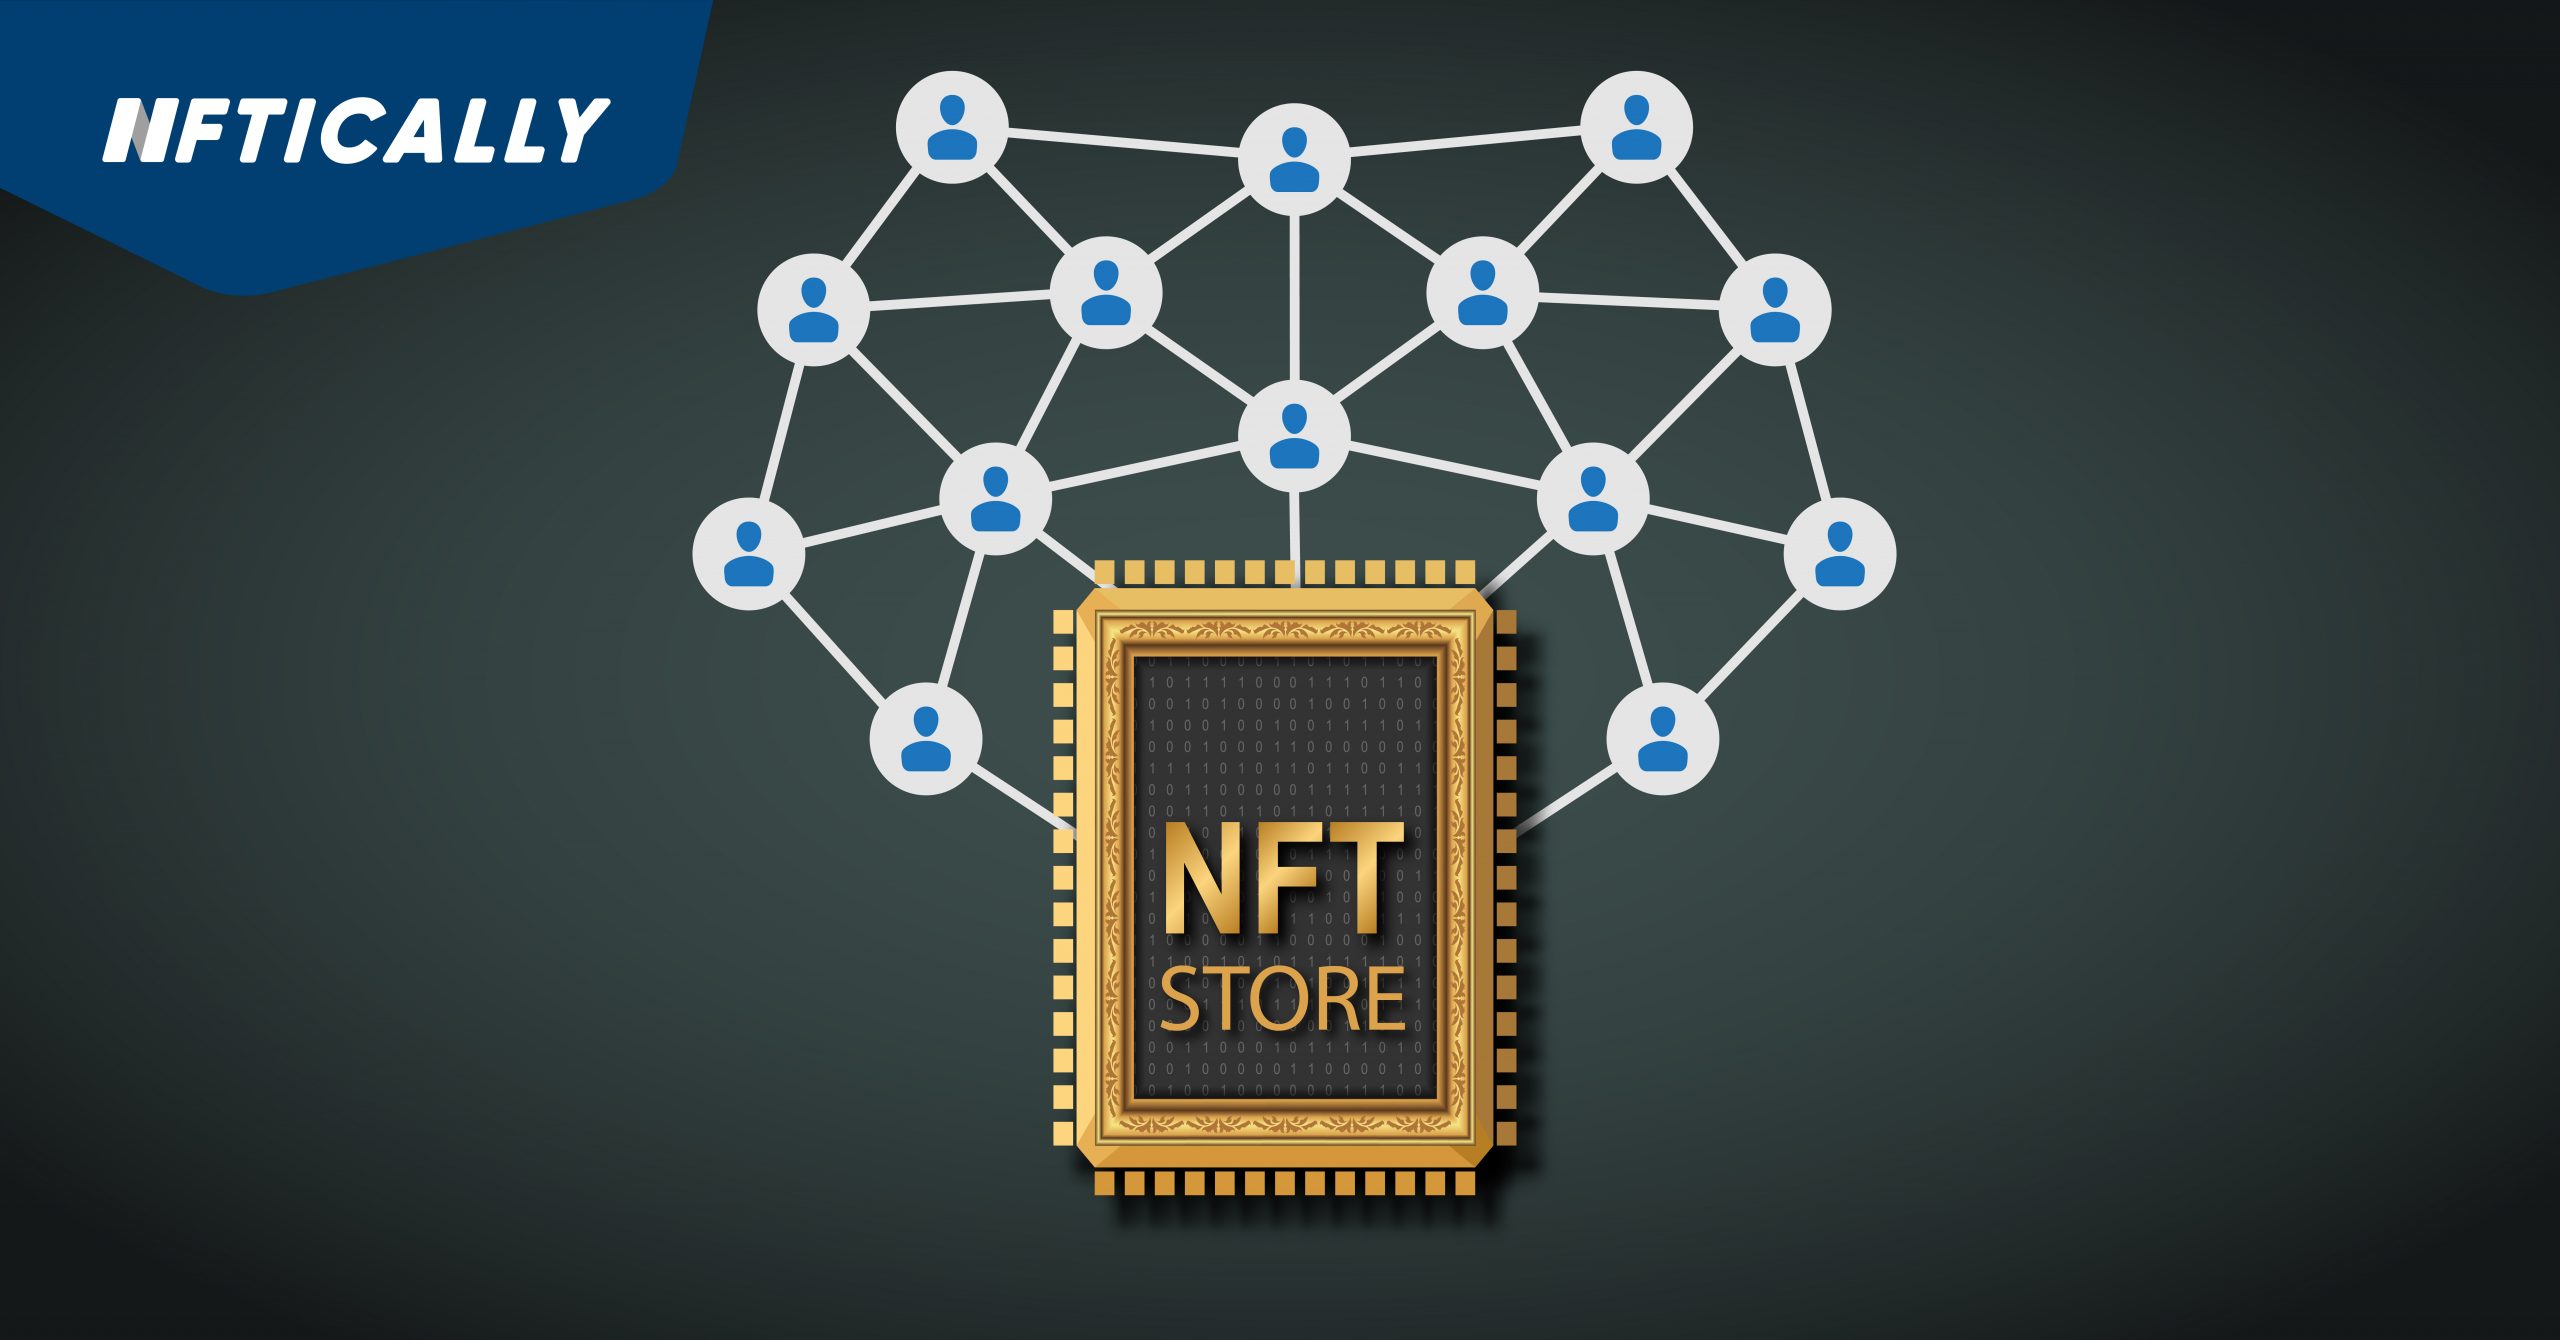 Learn about the Multiuser support for your NFT Store!